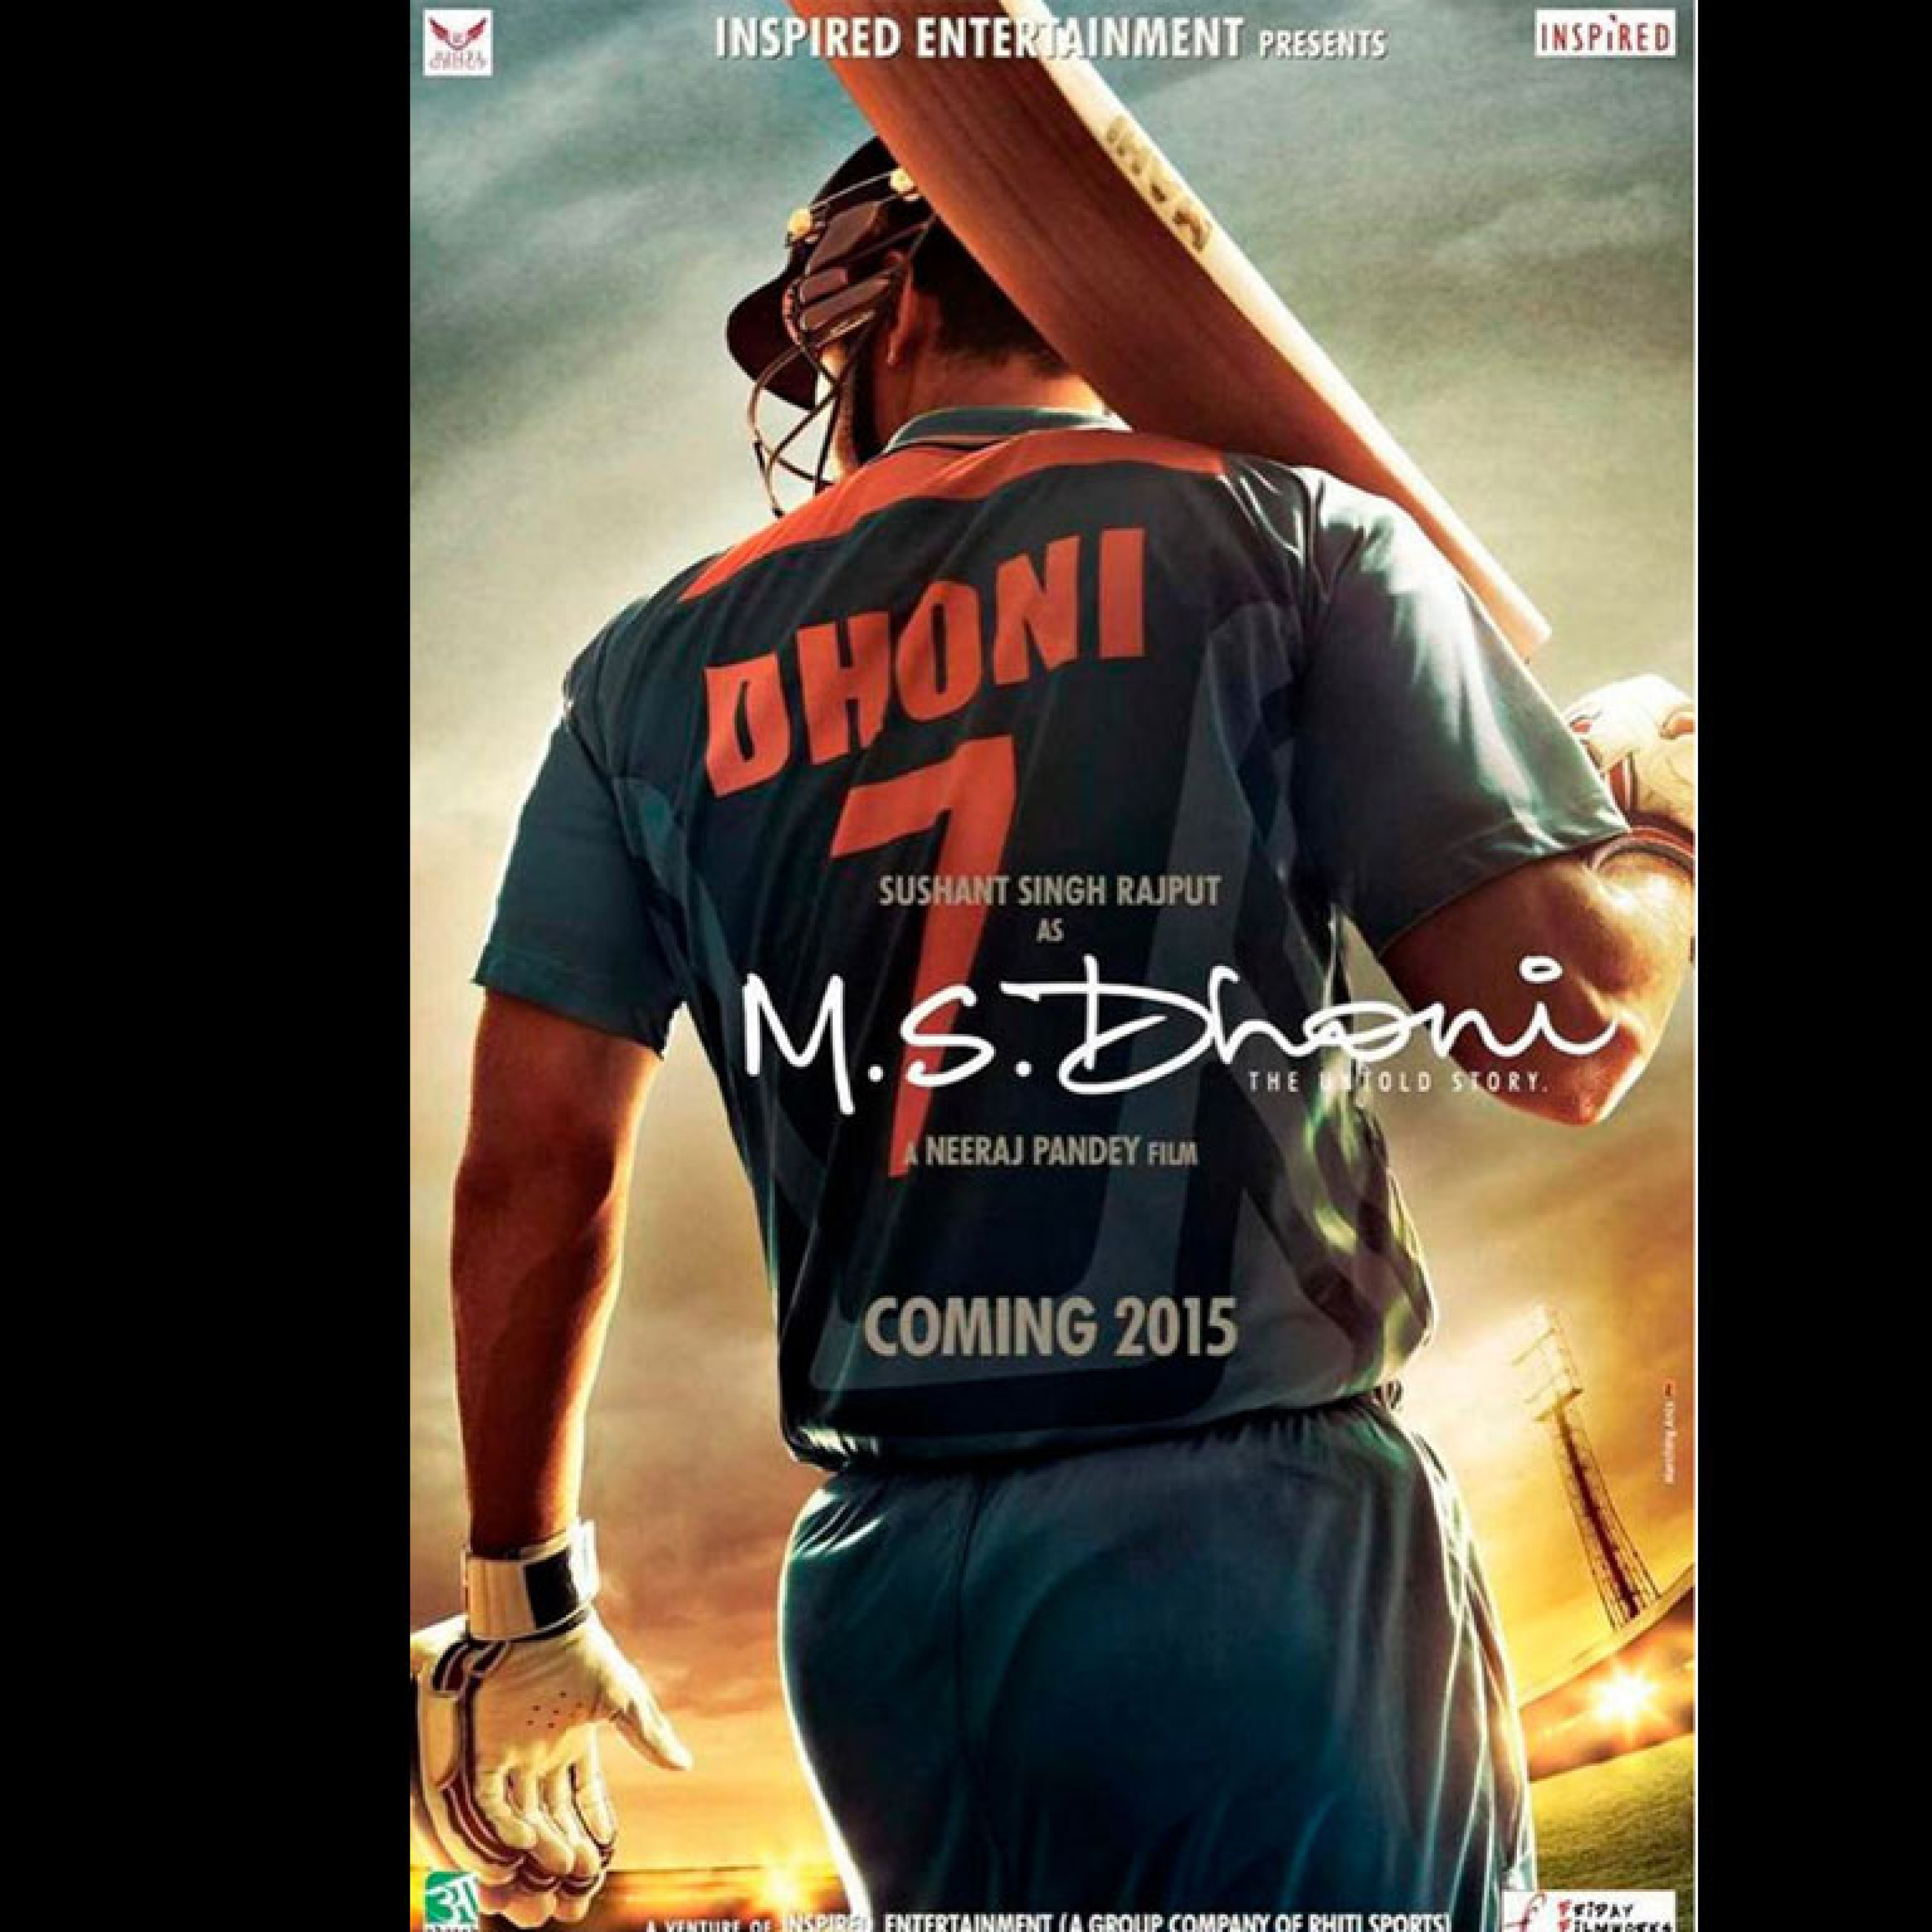 2932x2932 MS Dhoni Untold Story HD Wallpaper Ipad Pro Retina Display  Wallpaper, HD Movies 4K Wallpapers, Images, Photos and Background -  Wallpapers Den